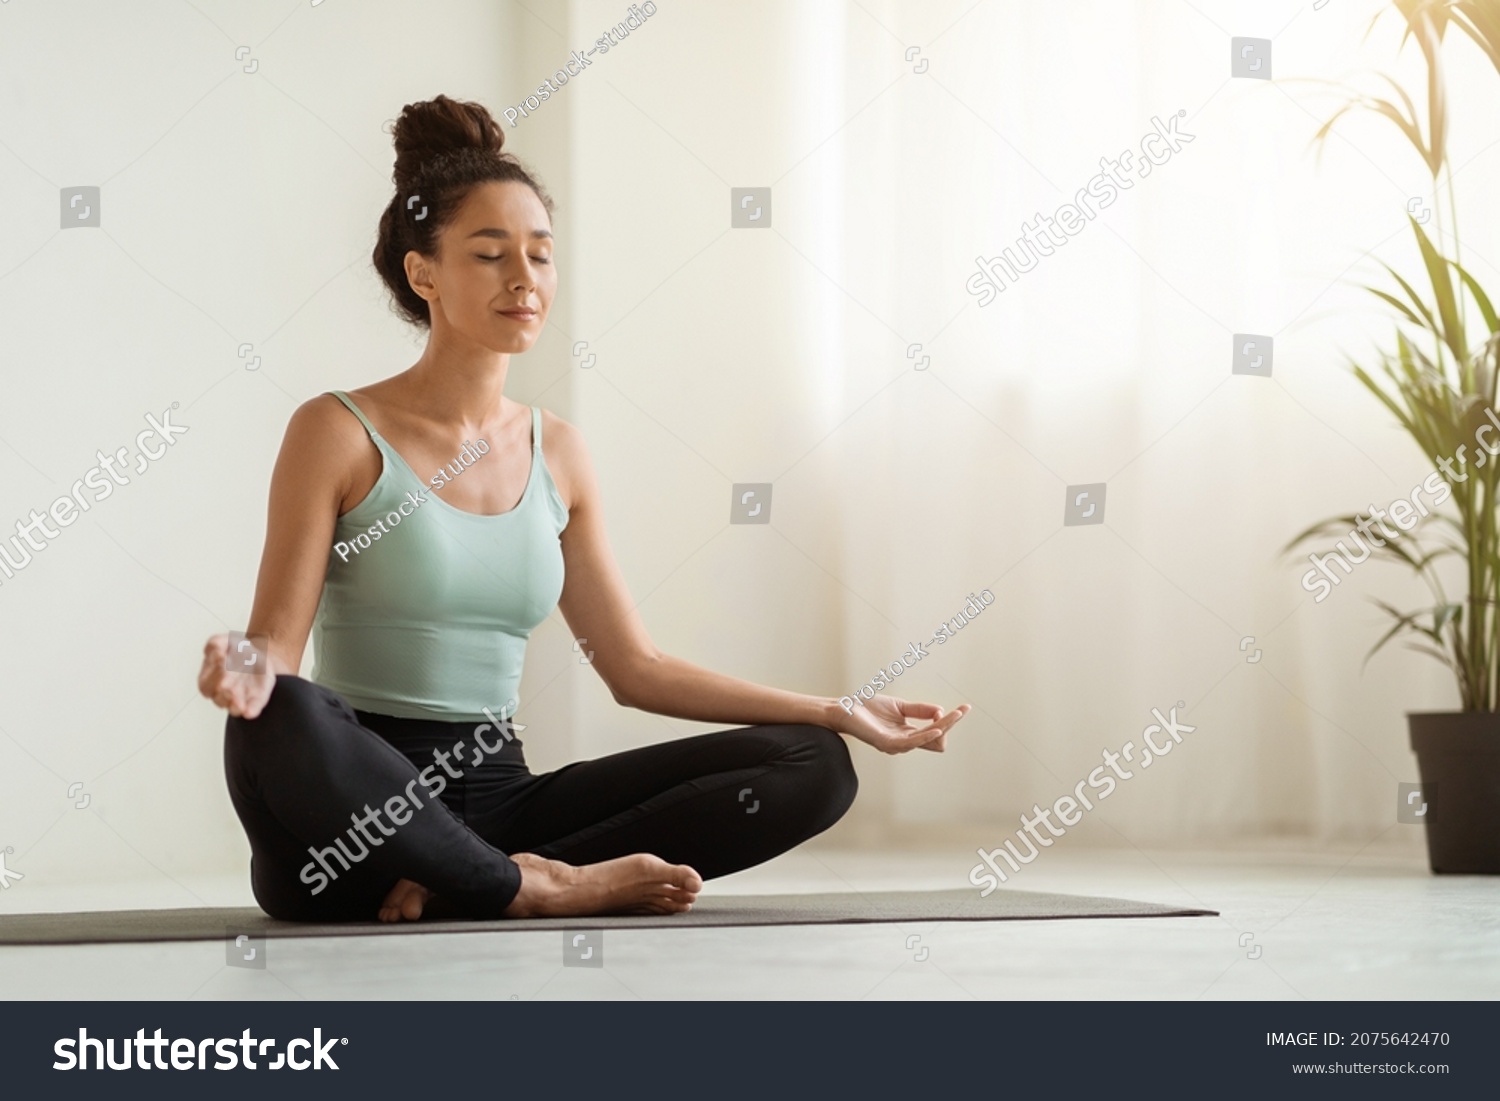 Morning Meditation. Beautiful Calm Woman Meditating At Home In Lotus Position, Peaceful Young Brunette Lady Practicing Yoga, Sitting With Closed Eyes On Fitness Mat In Light Room, Copy Space #2075642470